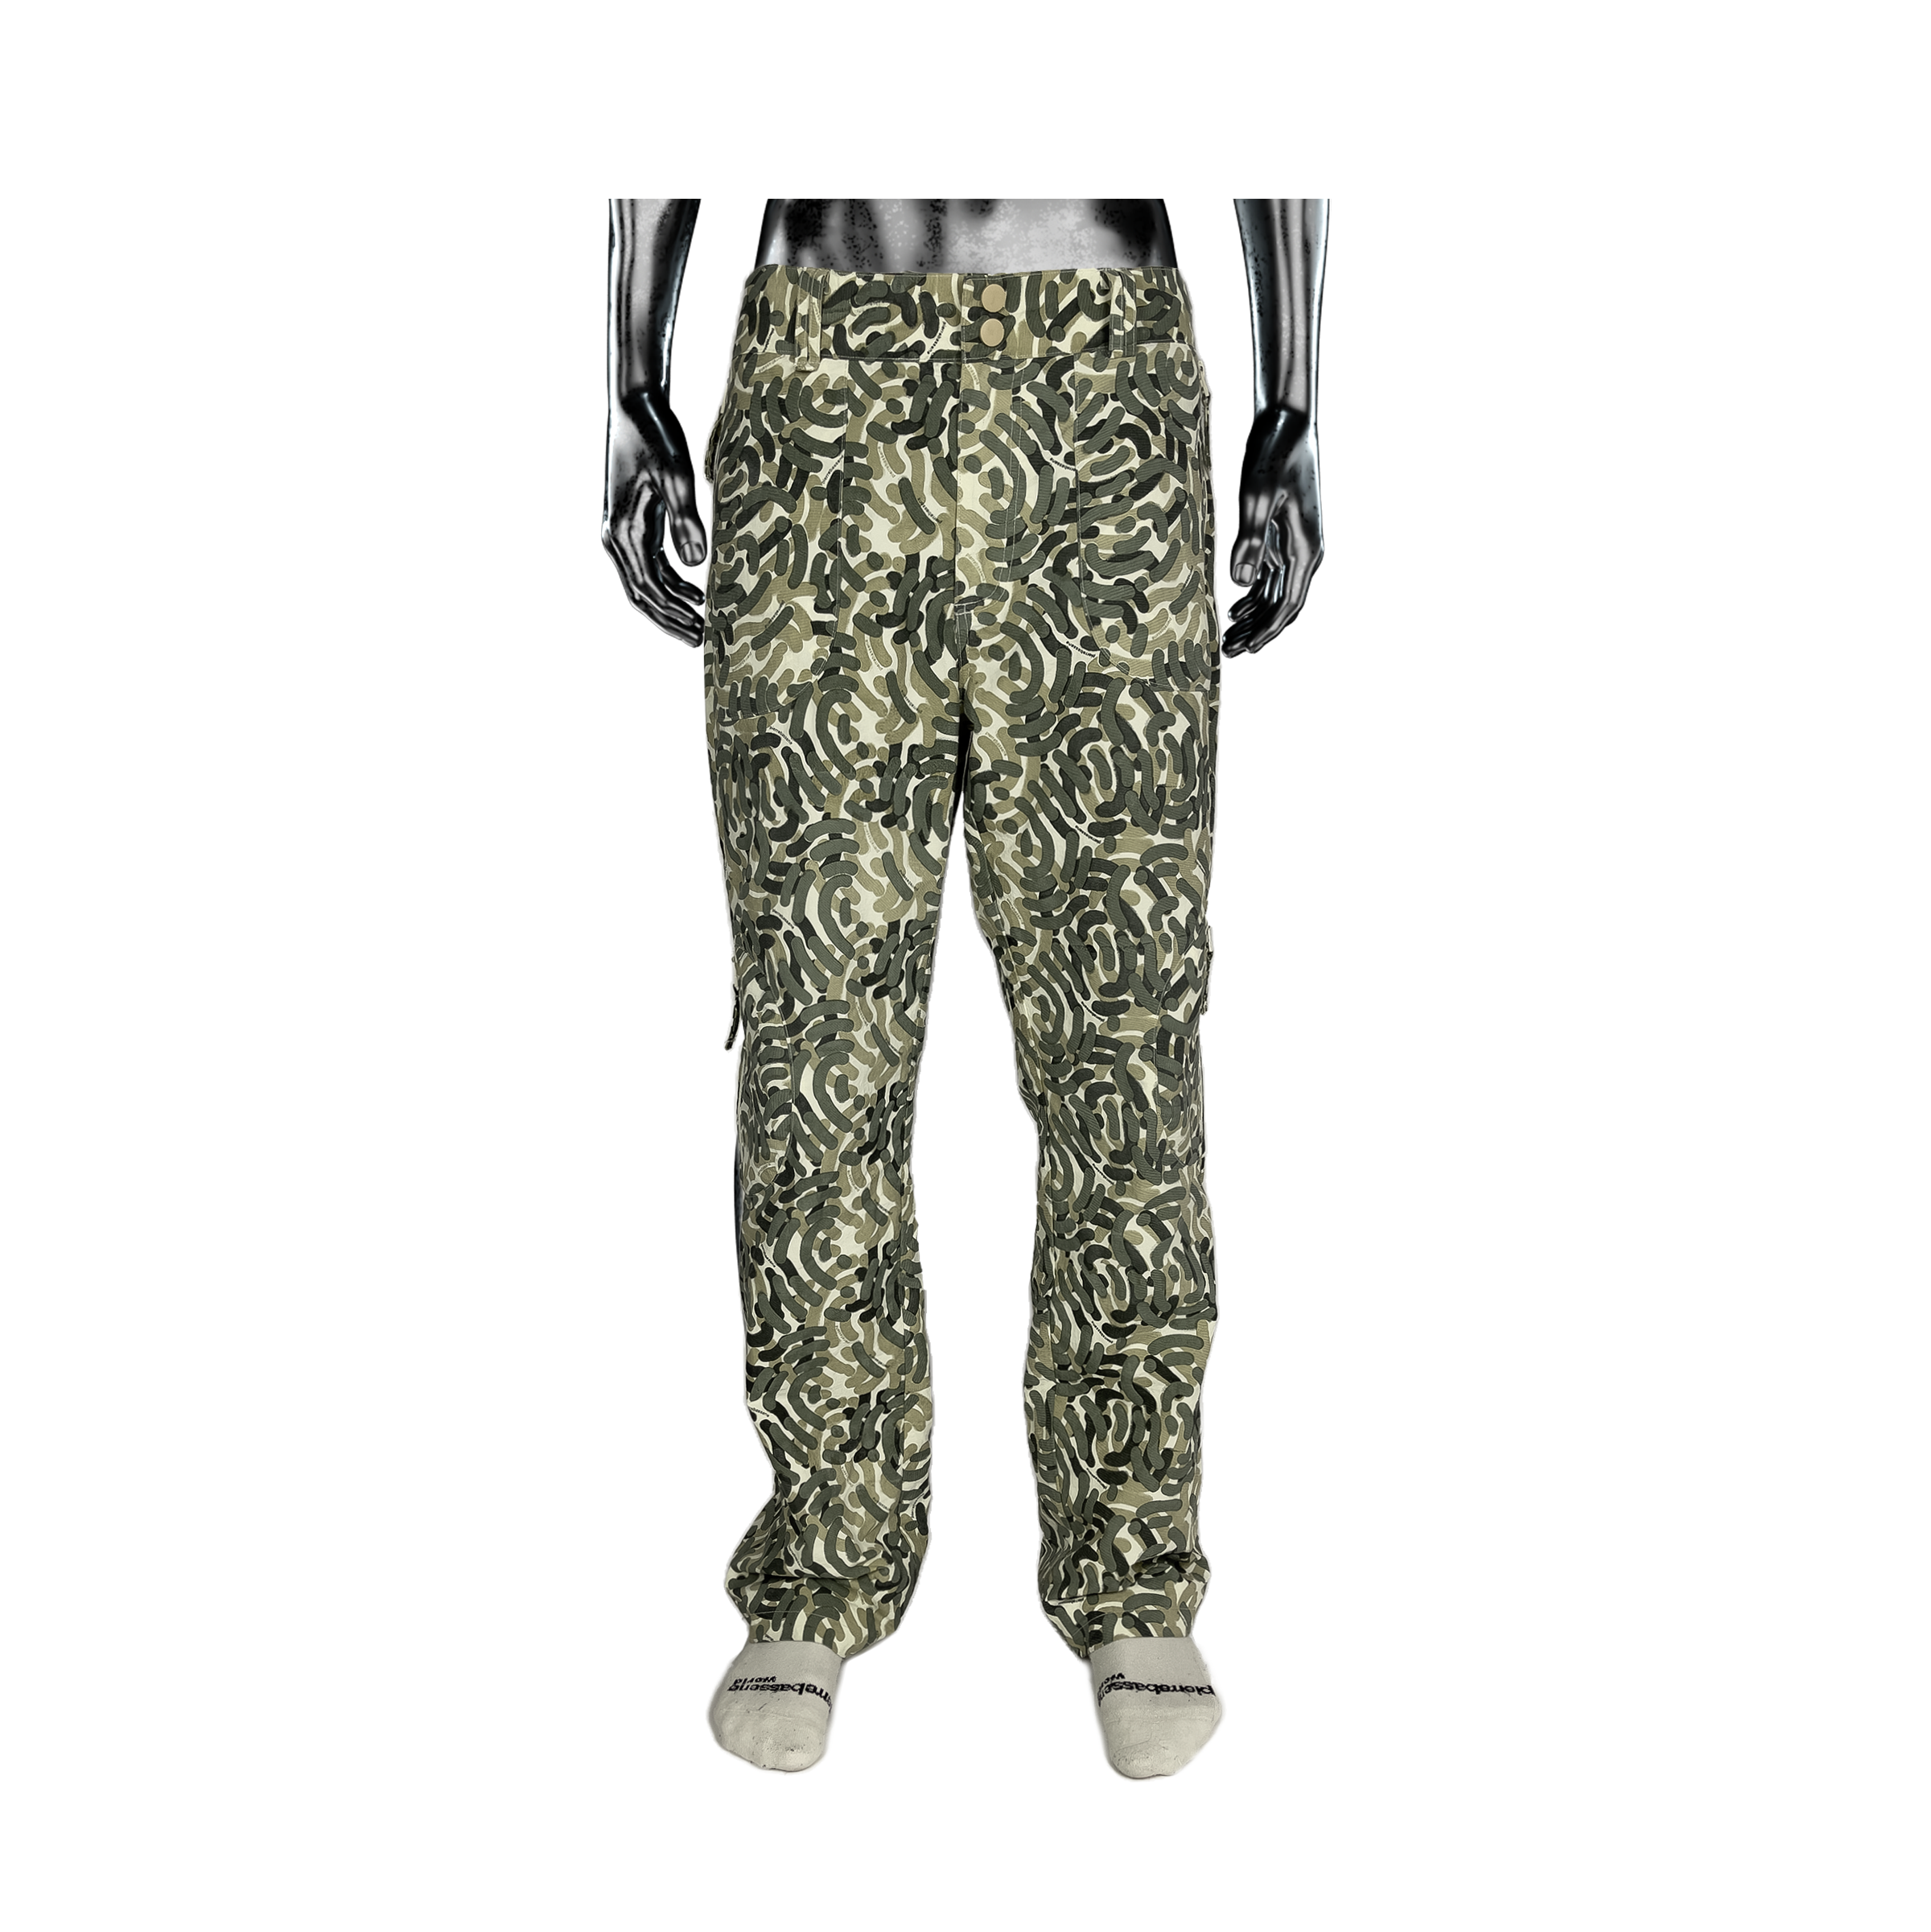 Field Pants℗ - Forest green Camo℗